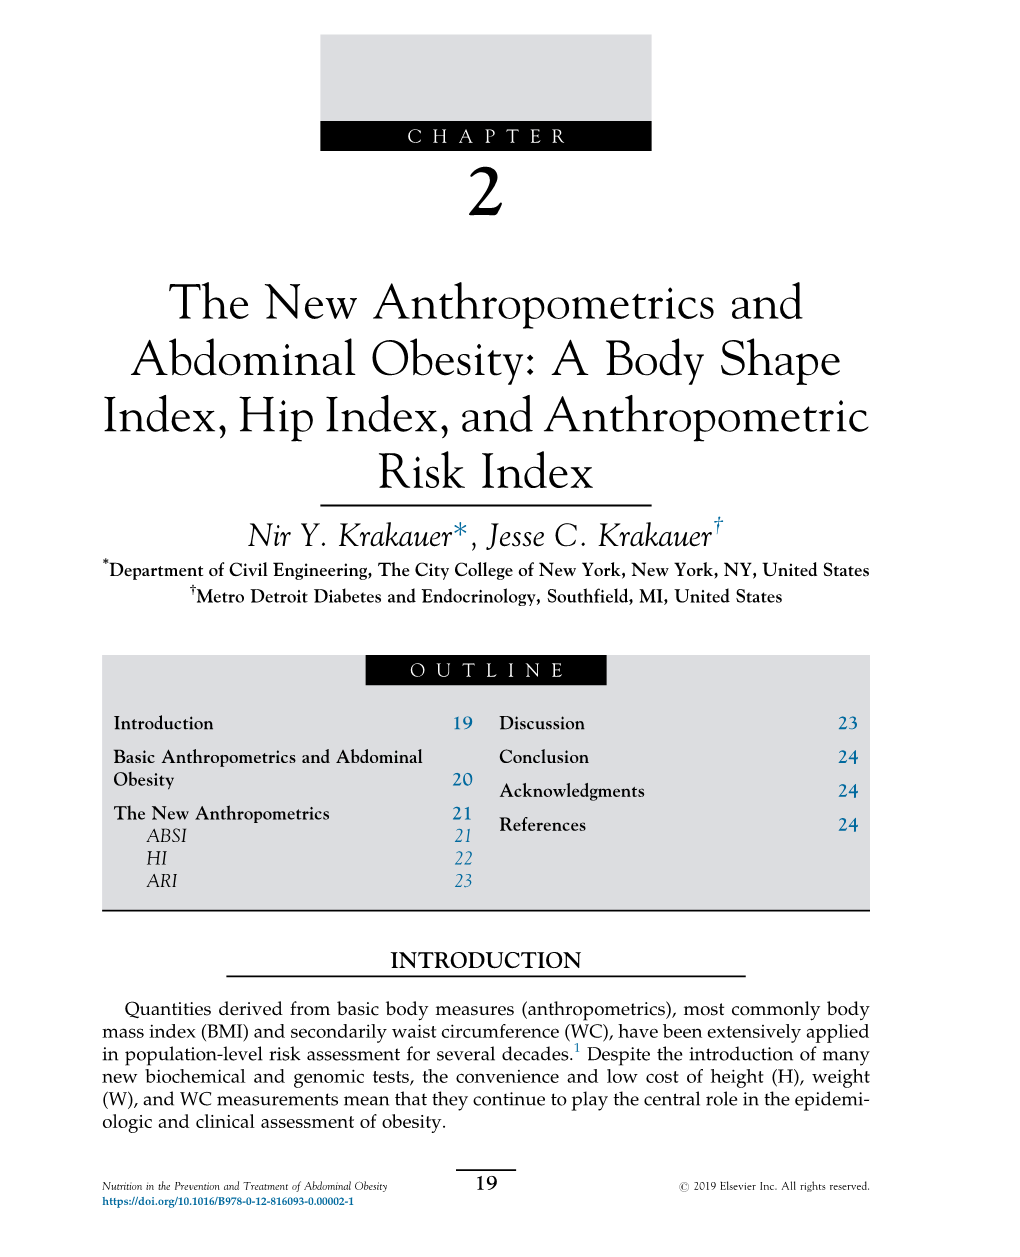 The New Anthropometrics and Abdominal Obesity: a Body Shape Index, Hip Index, and Anthropometric Risk Index